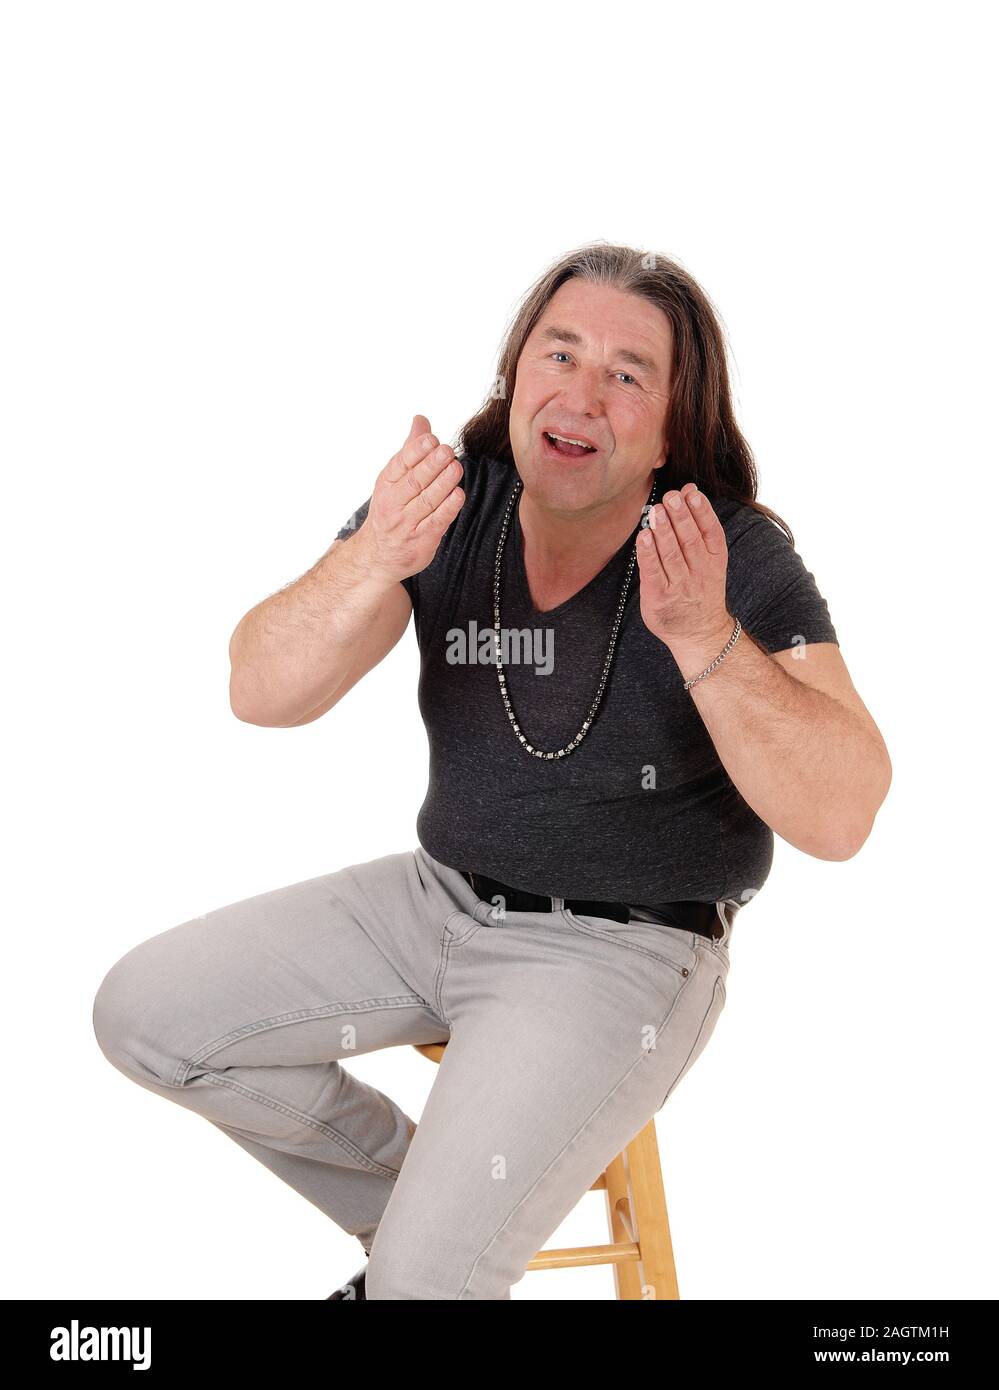 A close up image of a middle age indigenous man sitting on a chair and blowing a kiss, isolated for white background Stock Photo